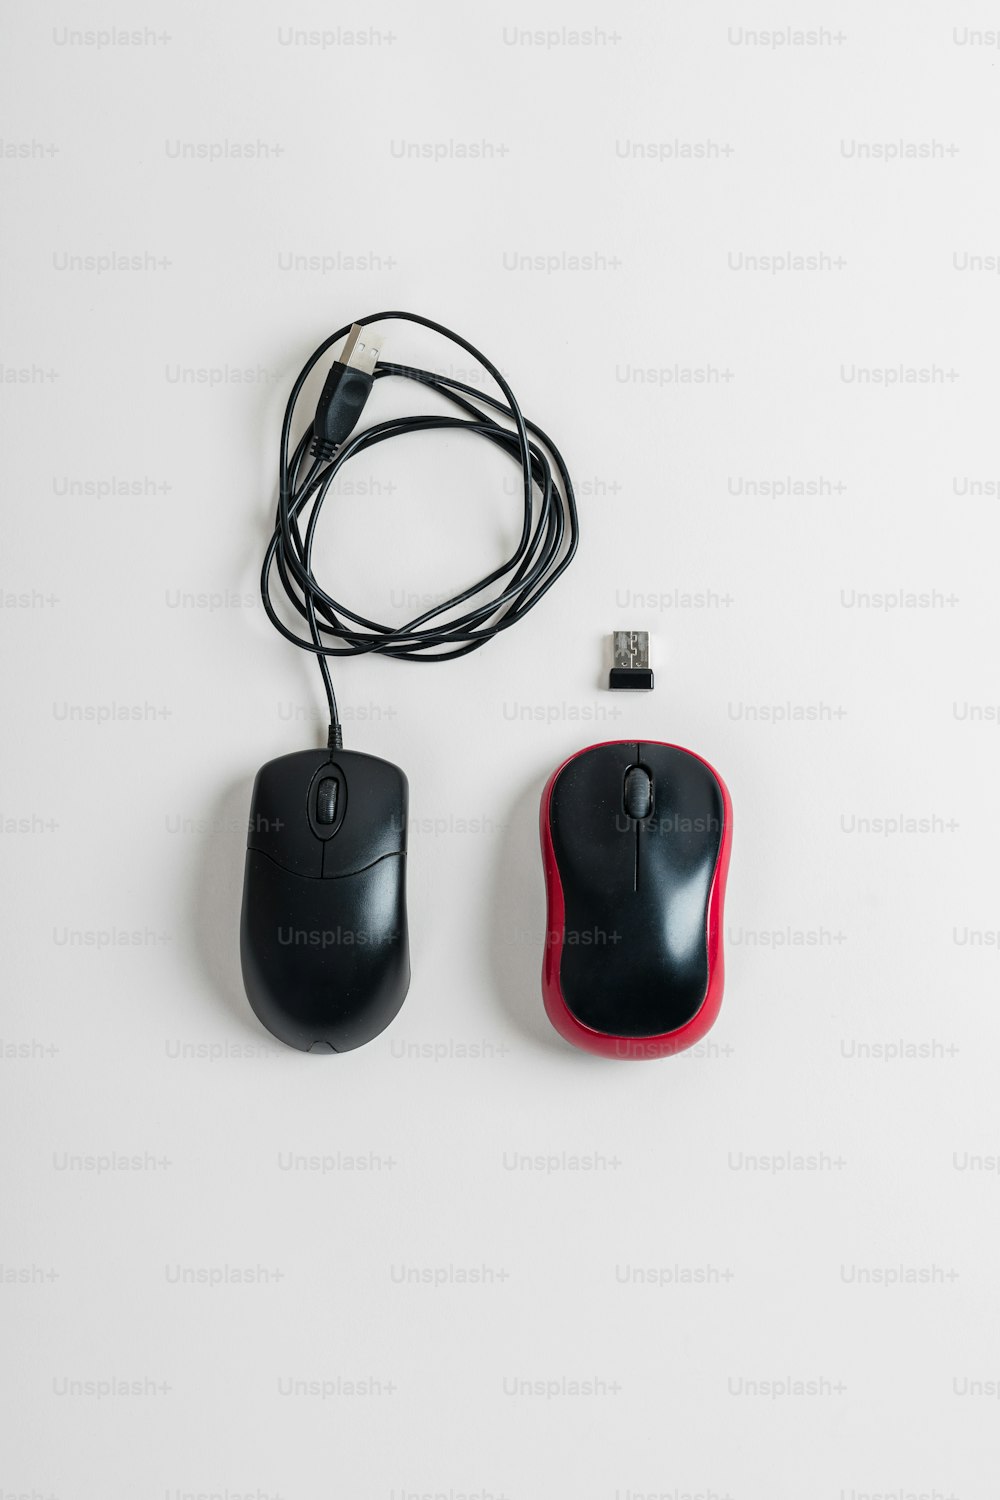 a black and red computer mouse next to a usb mouse